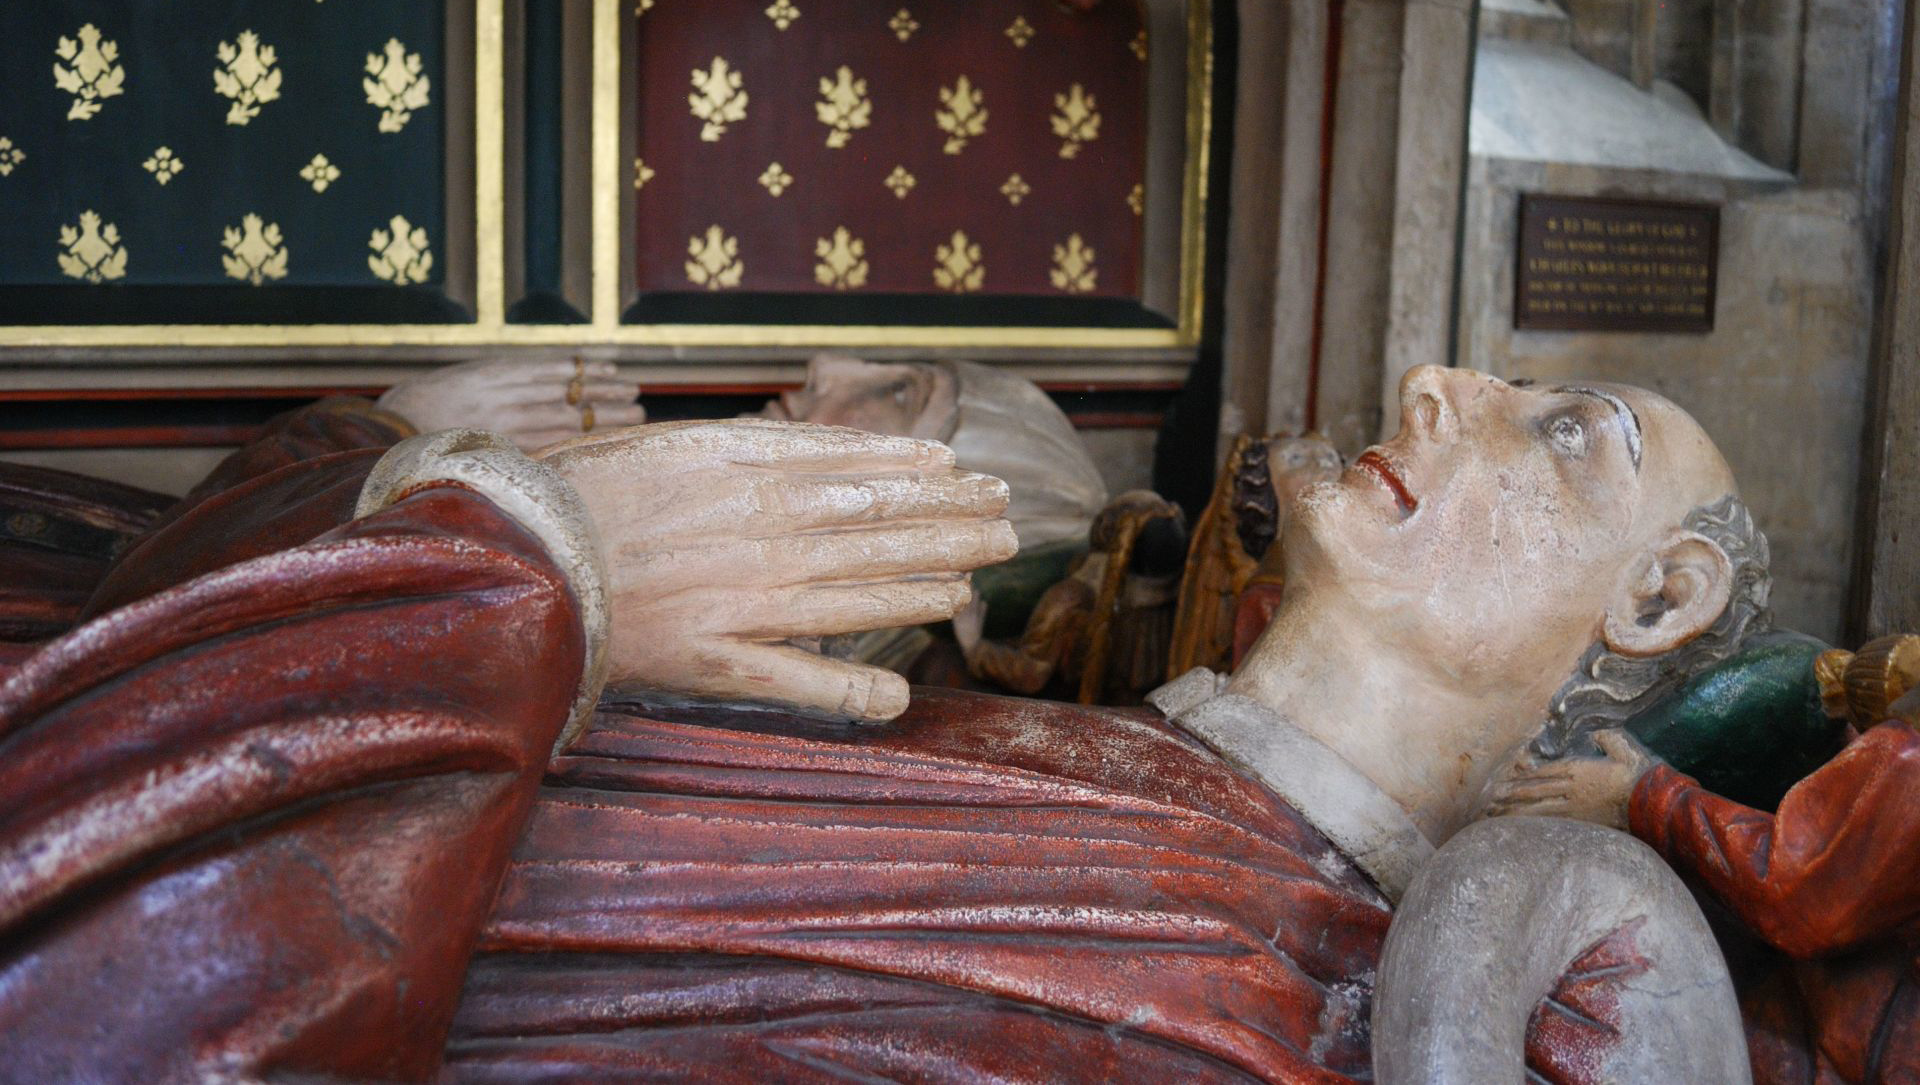 An effigy of William Canynges in priestly robes at St Mary Redcliffe Church